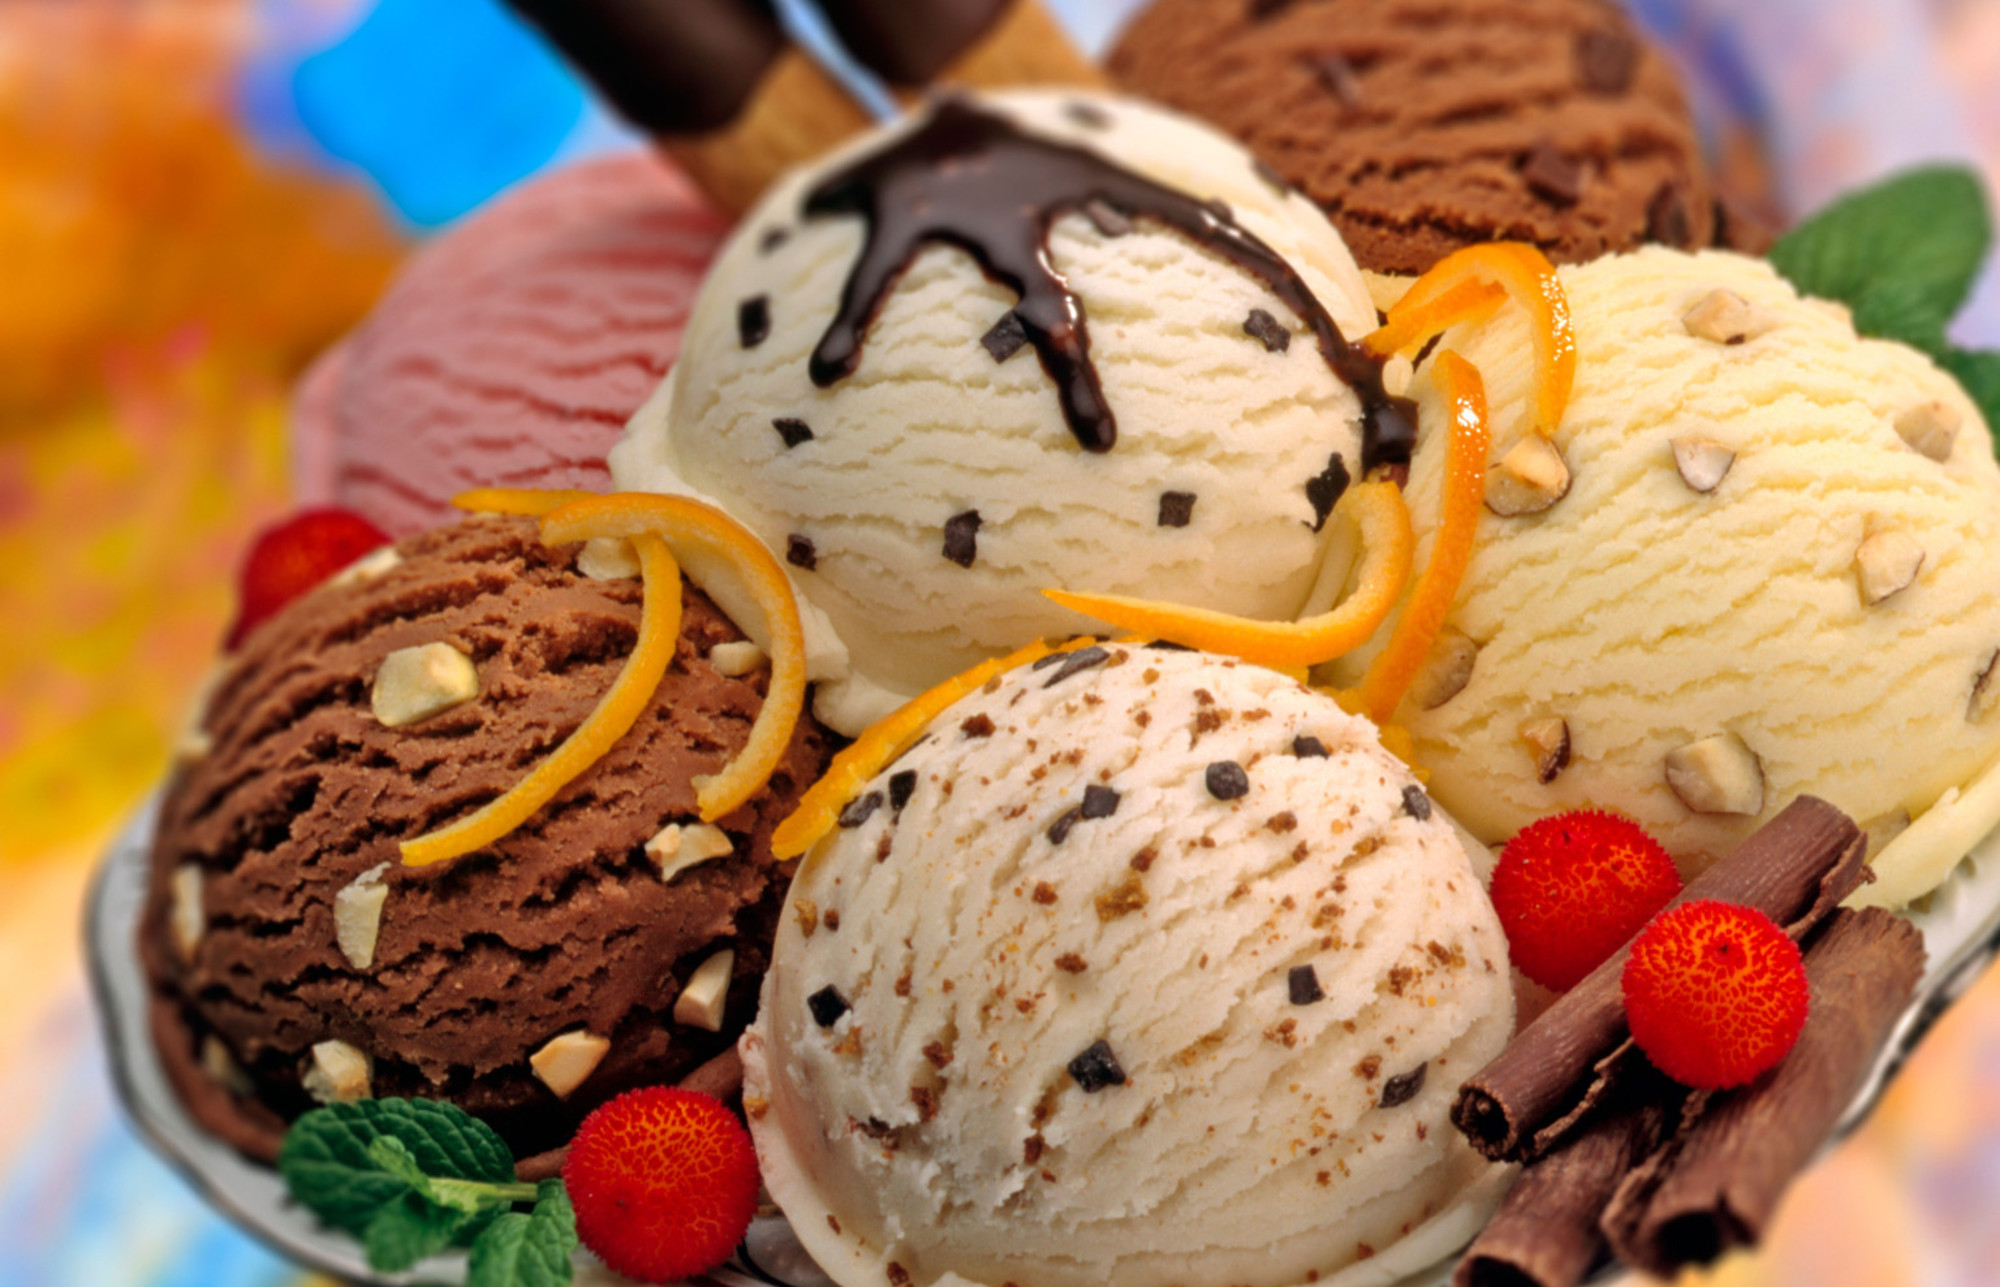 Colorful Ice Cream Wallpapers